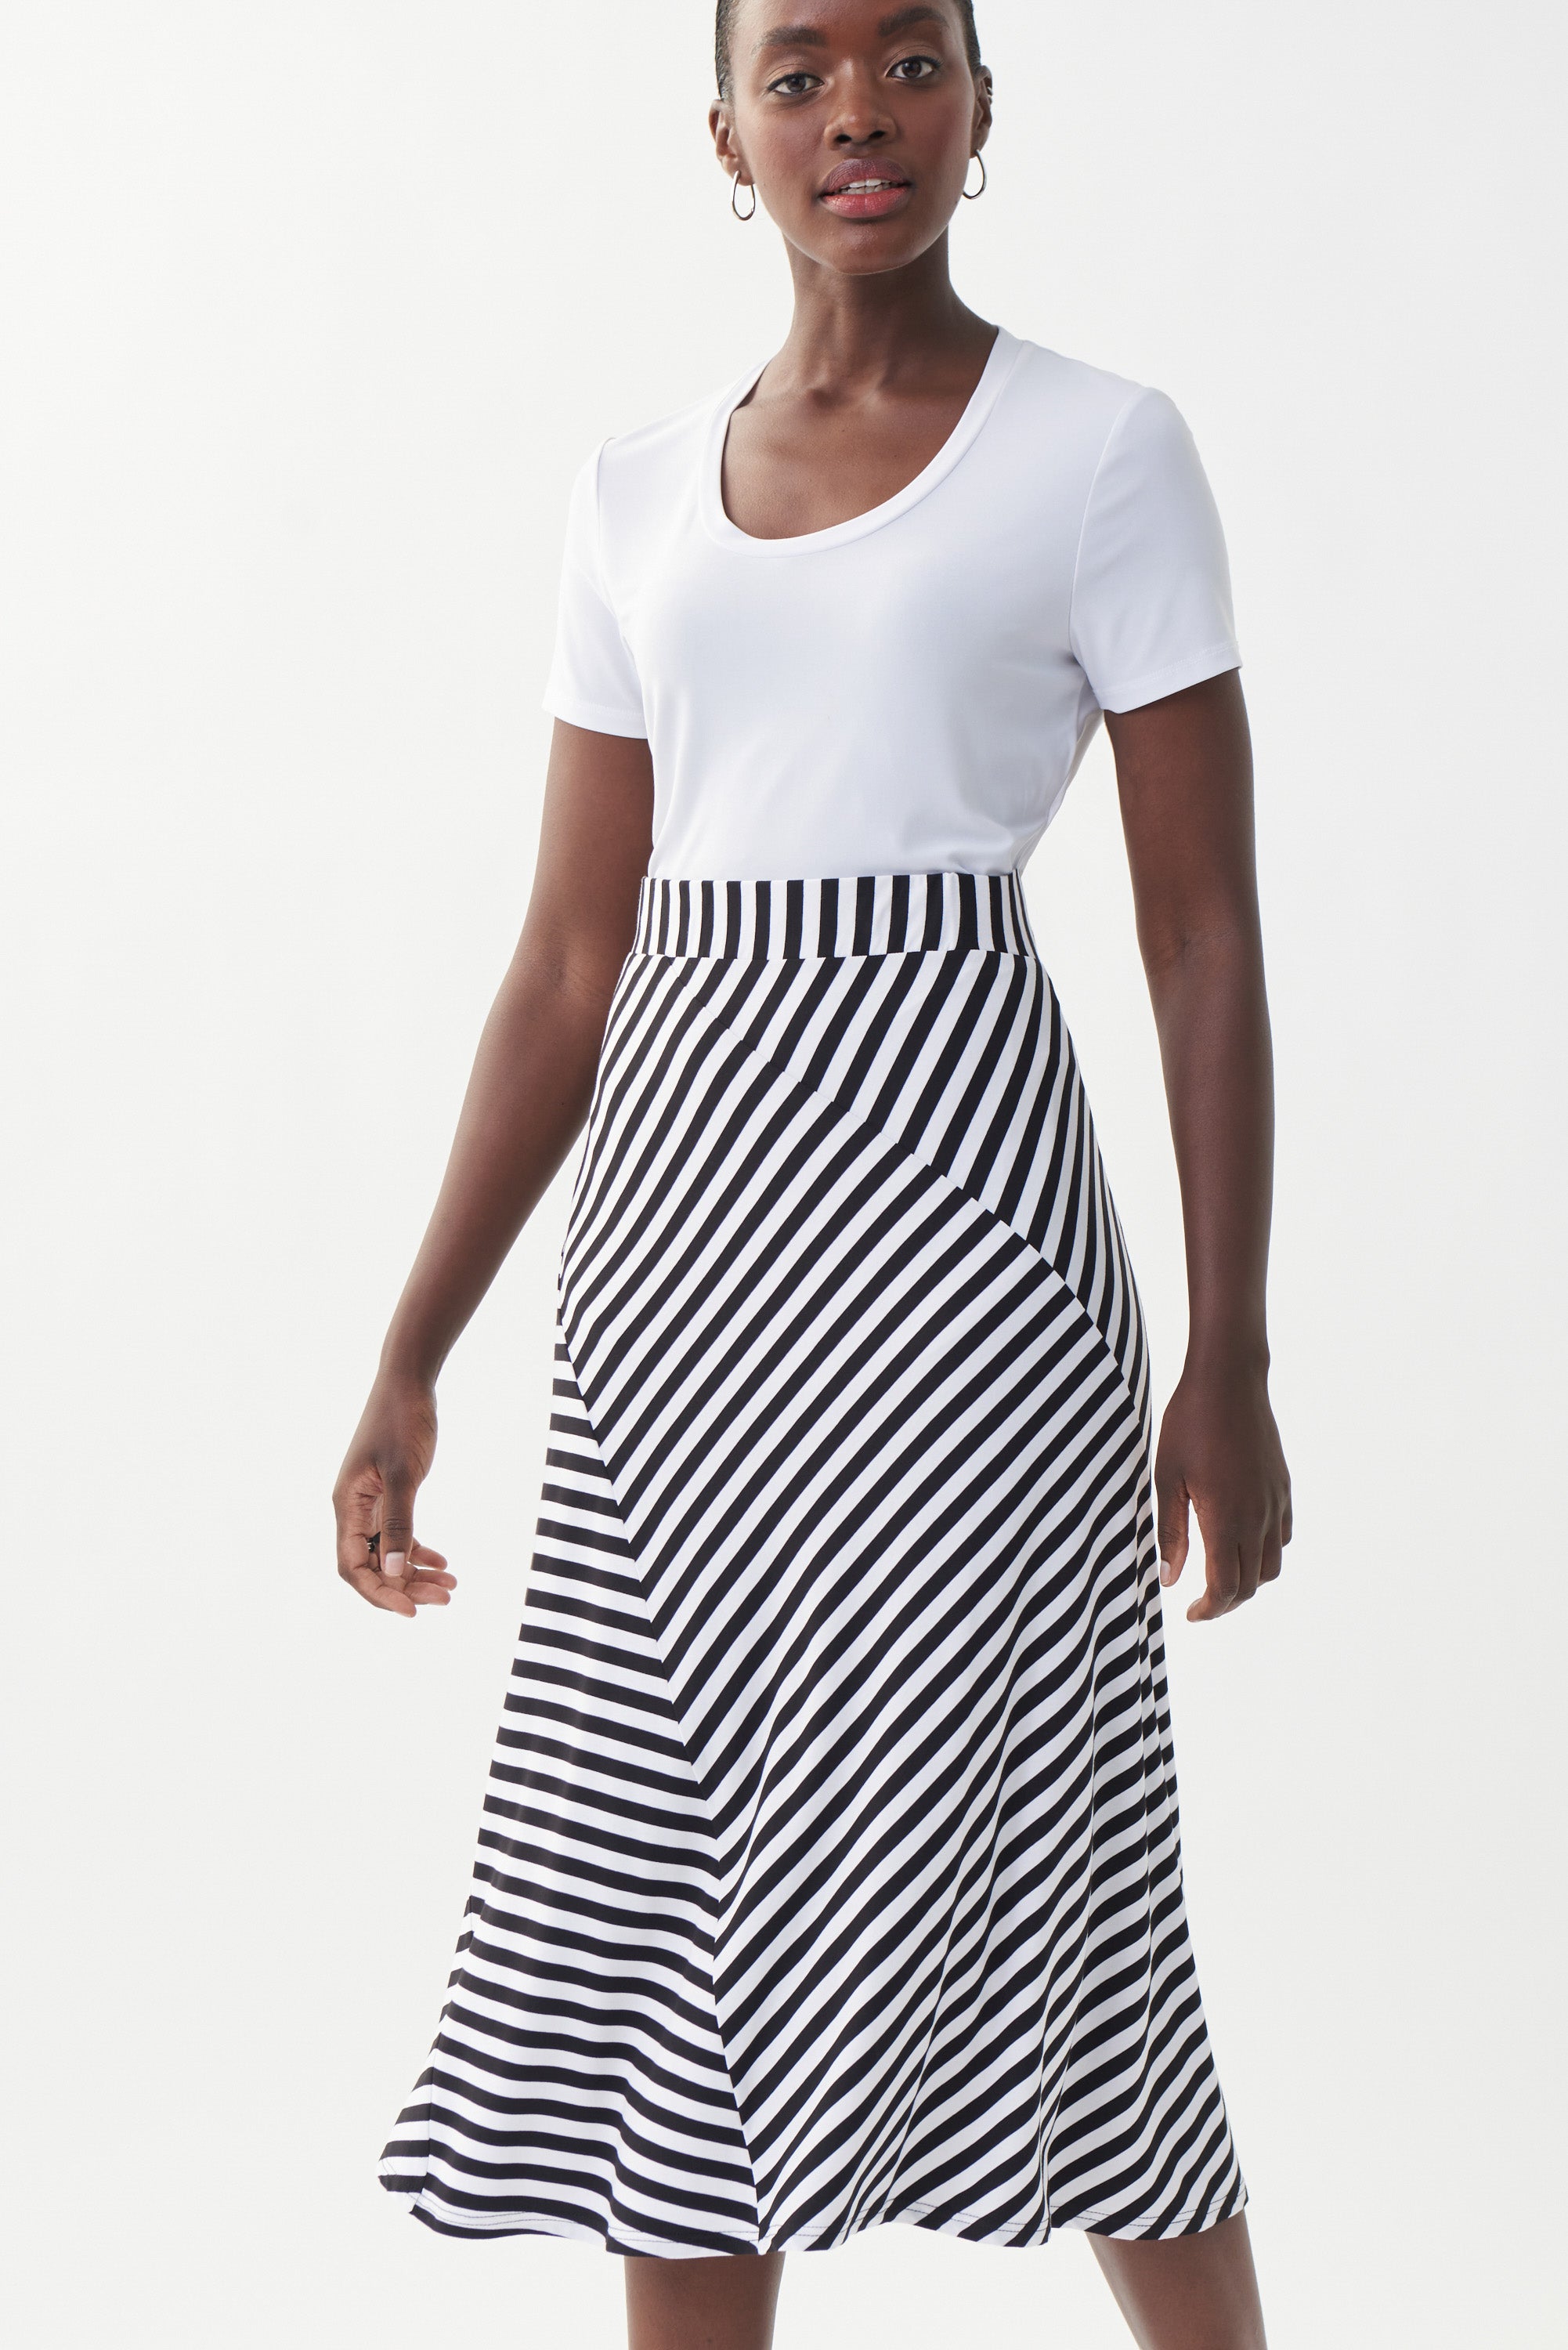 This lovely Joseph Ribkoff Stripe Skirt features a comfortable elastic waist, lightweight fabric and diagonally stitched panels, offering a stylish and visually unique twist on a classic. Proudly made in Canada.